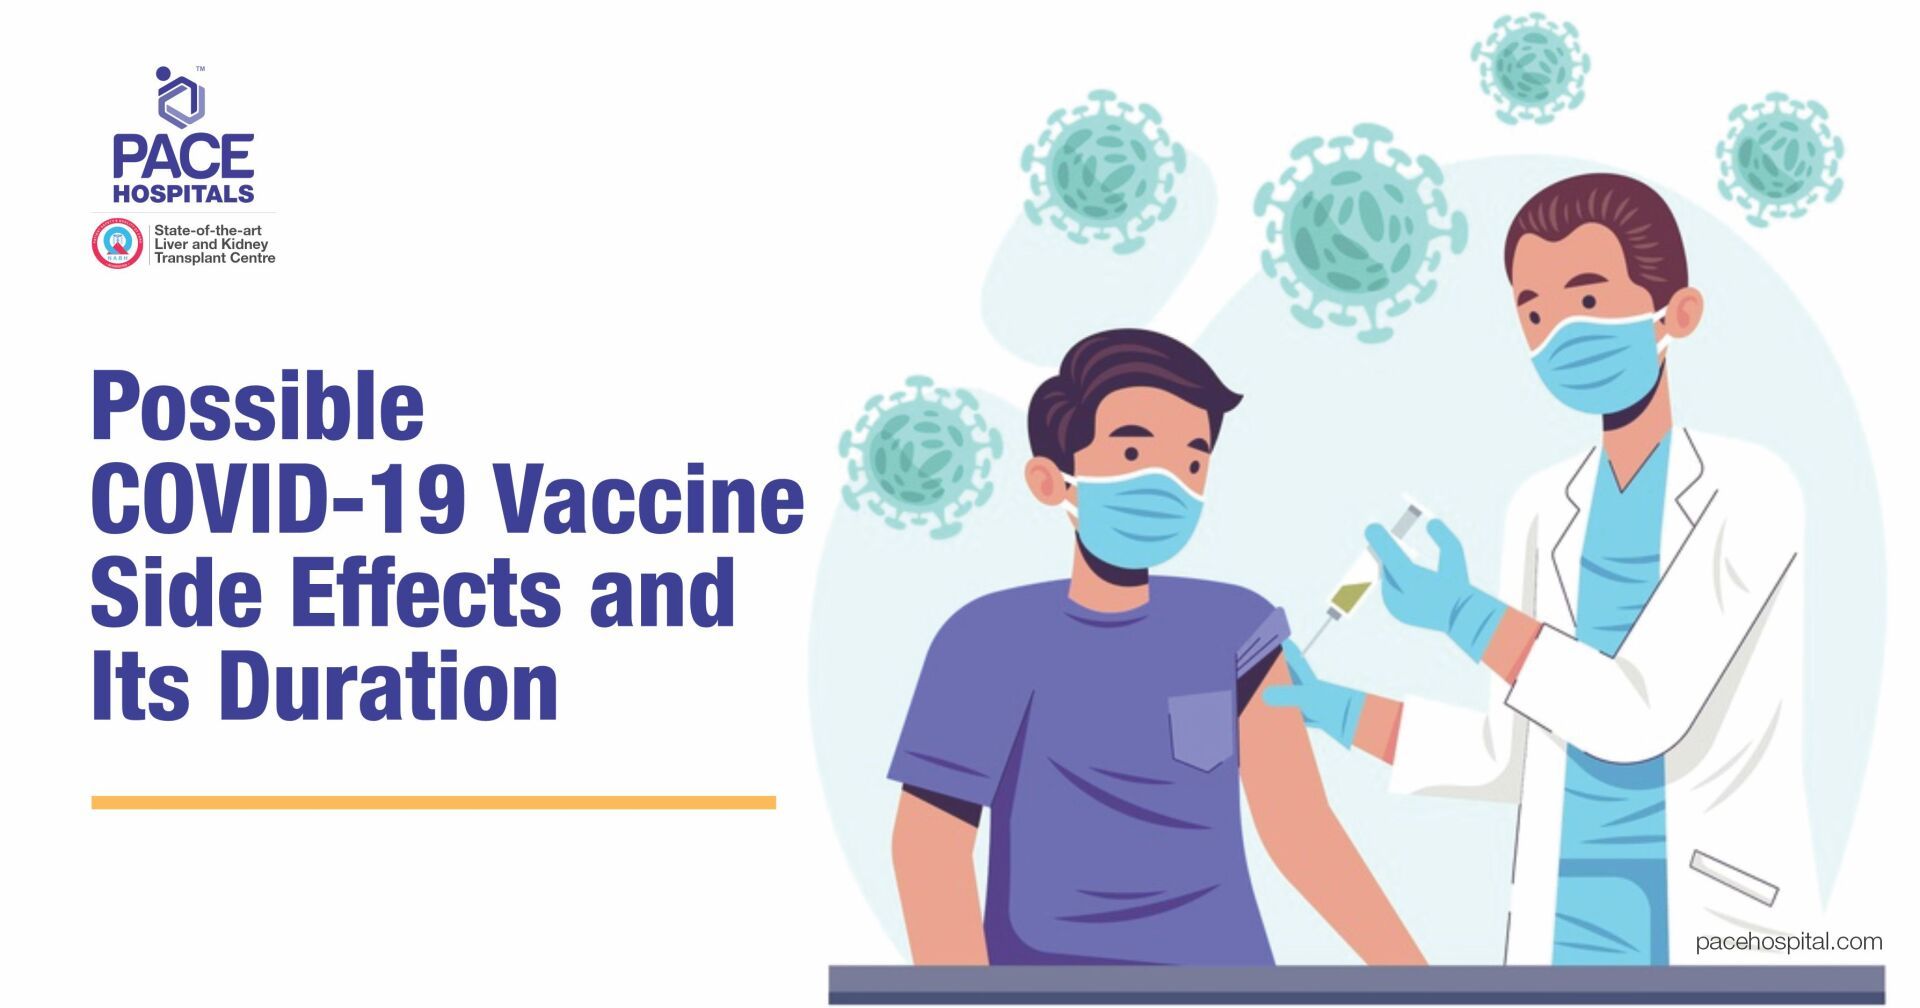 List of Possible COVID-19 Vaccine Side Effects and Its Duration